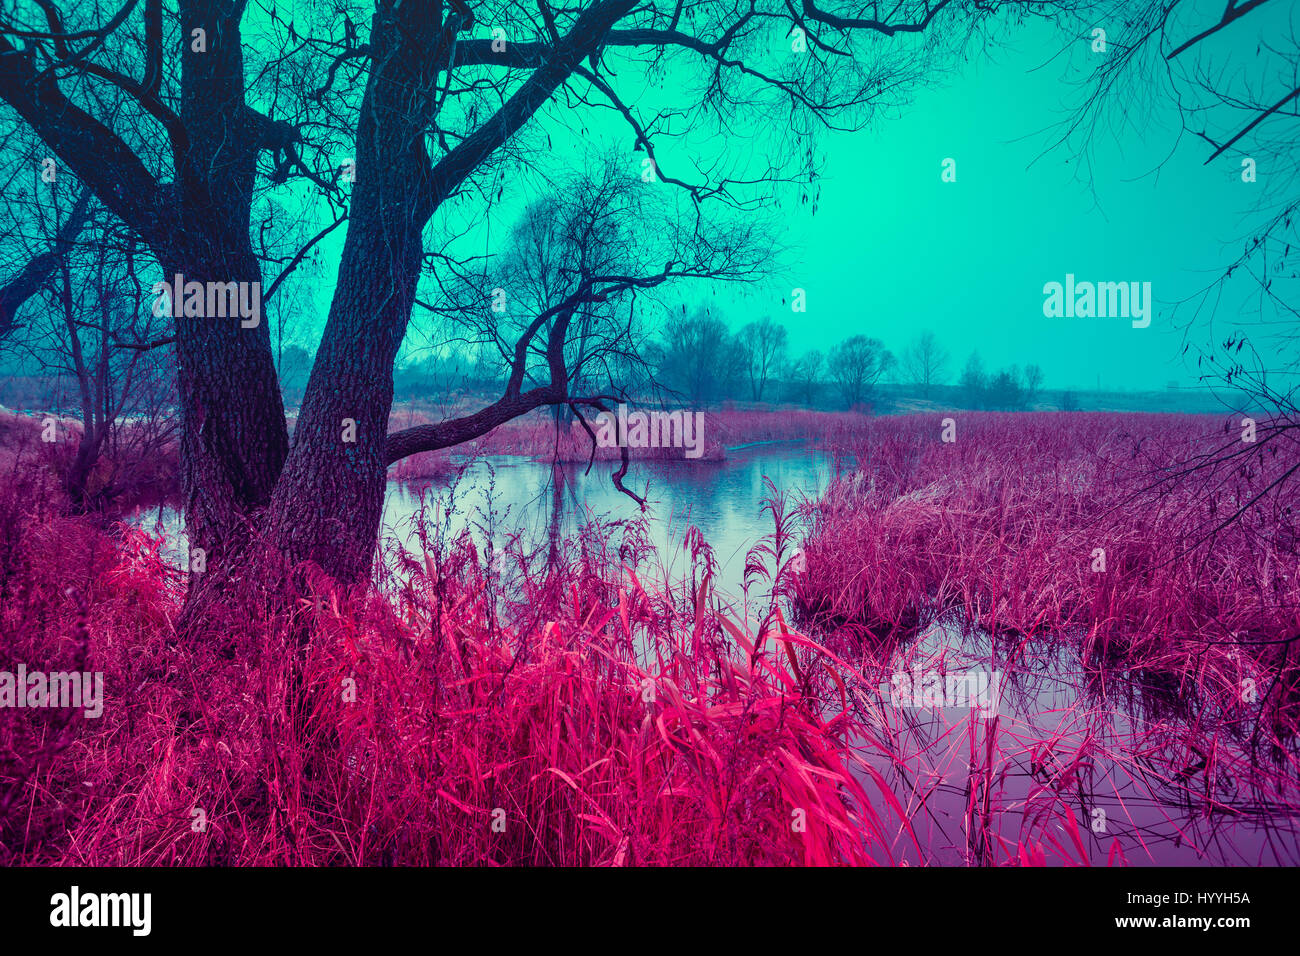 Blue red vintage autumn rural landscape. Tree without leaves near calm river. Misty morning in countryside. Stock Photo